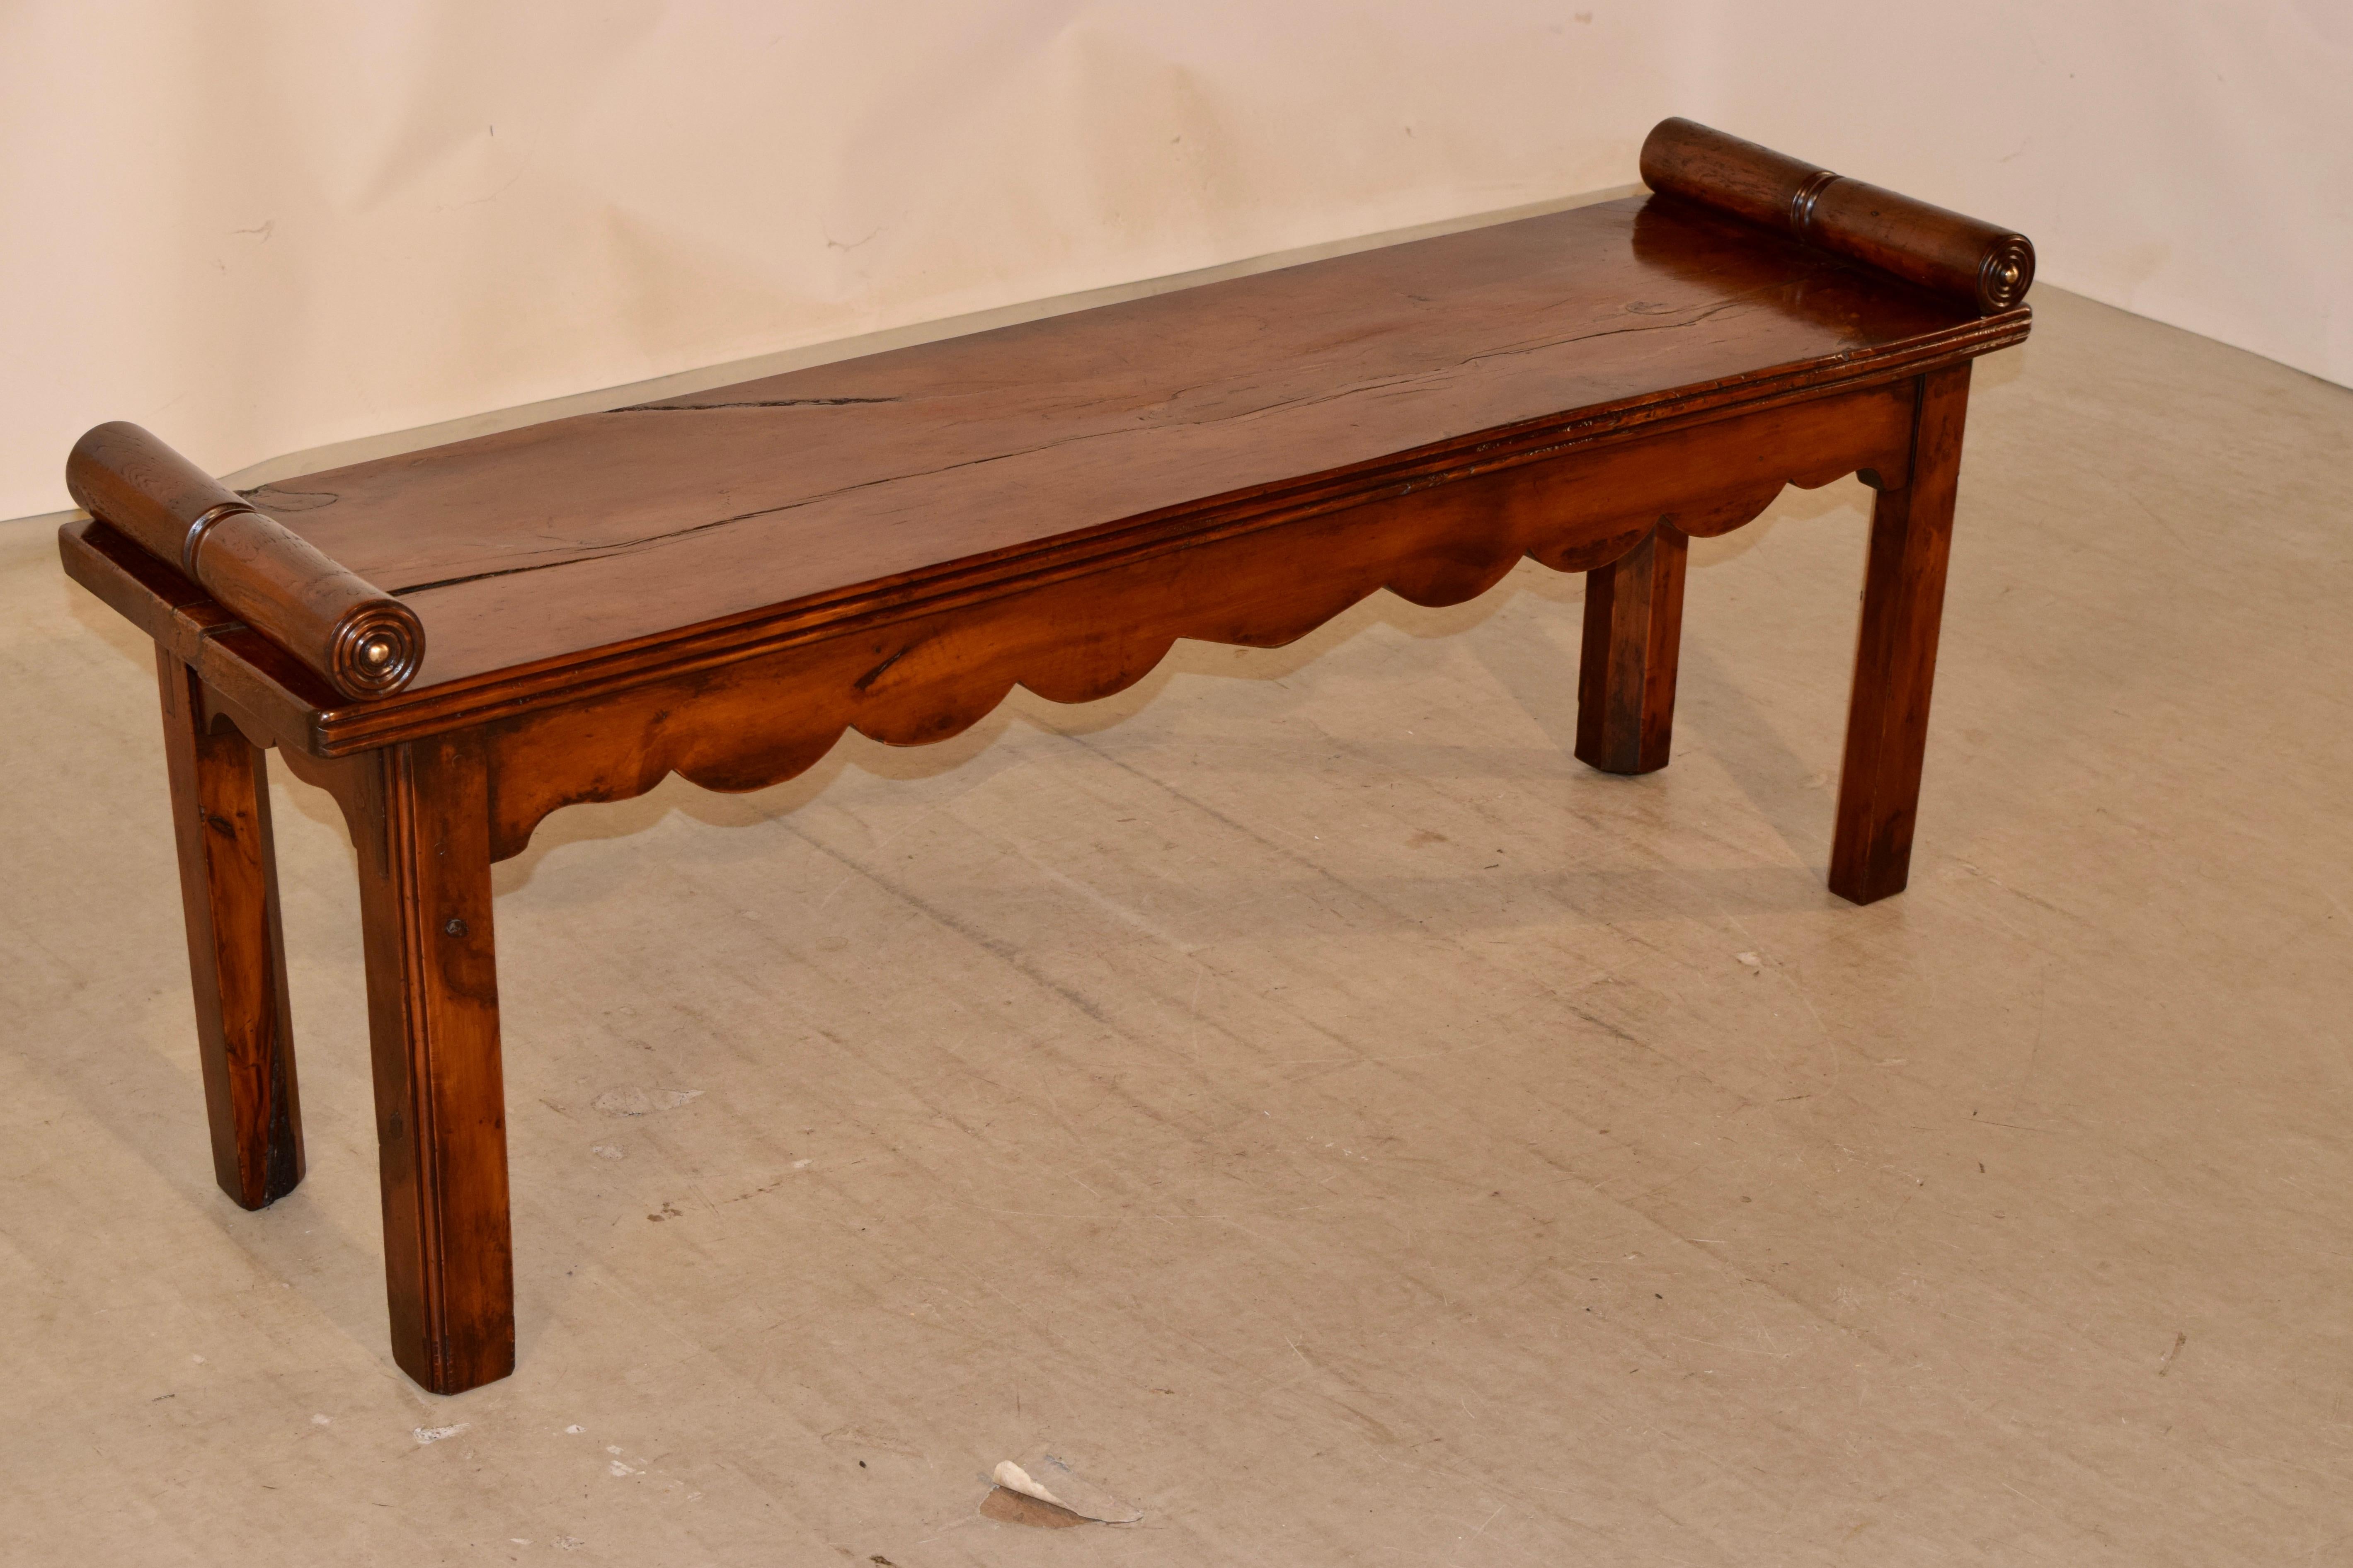 19th century English bench made from pecky cypress. The bench is in an elegant Regency form with hand turned rolled arms over a single plank seat with a molded edge and a scalloped apron on one side and a simple apron on the other. The bench is